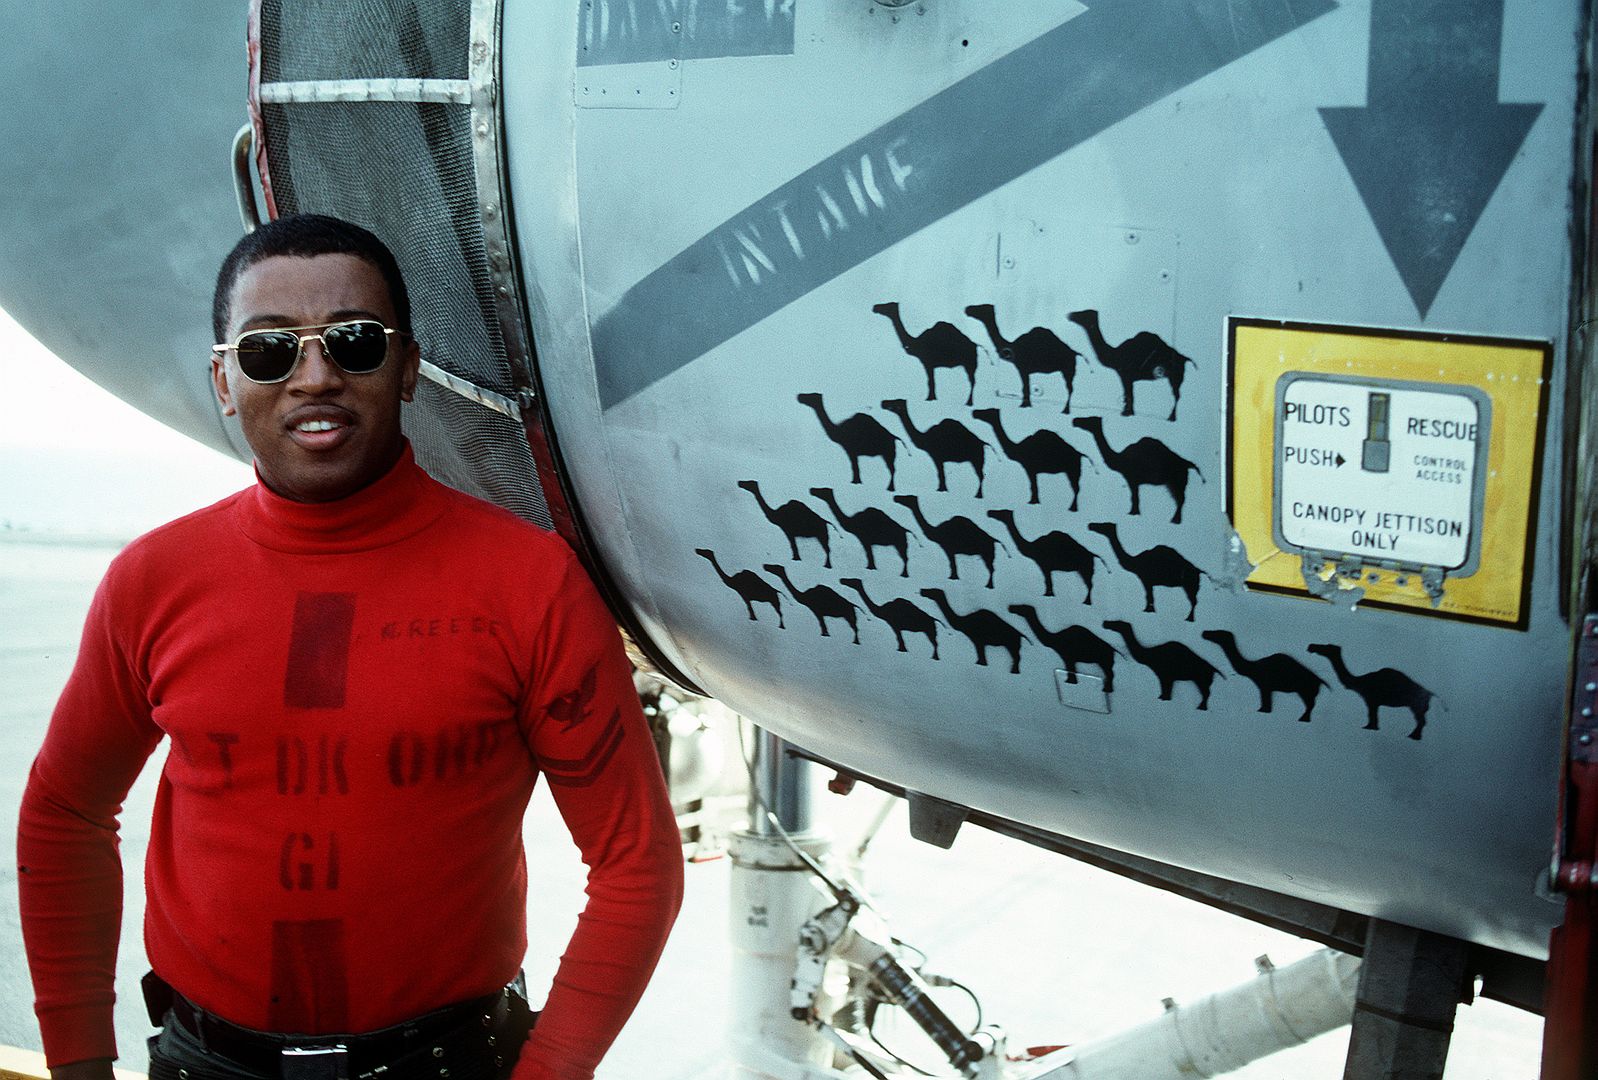 An Aviation Ordnanceman Stands Next To The Mission Markings Painted On The Side On An A 6E Intruder Aircraft On The Flight Deck Of The Aircraft Carrier USS RANGER